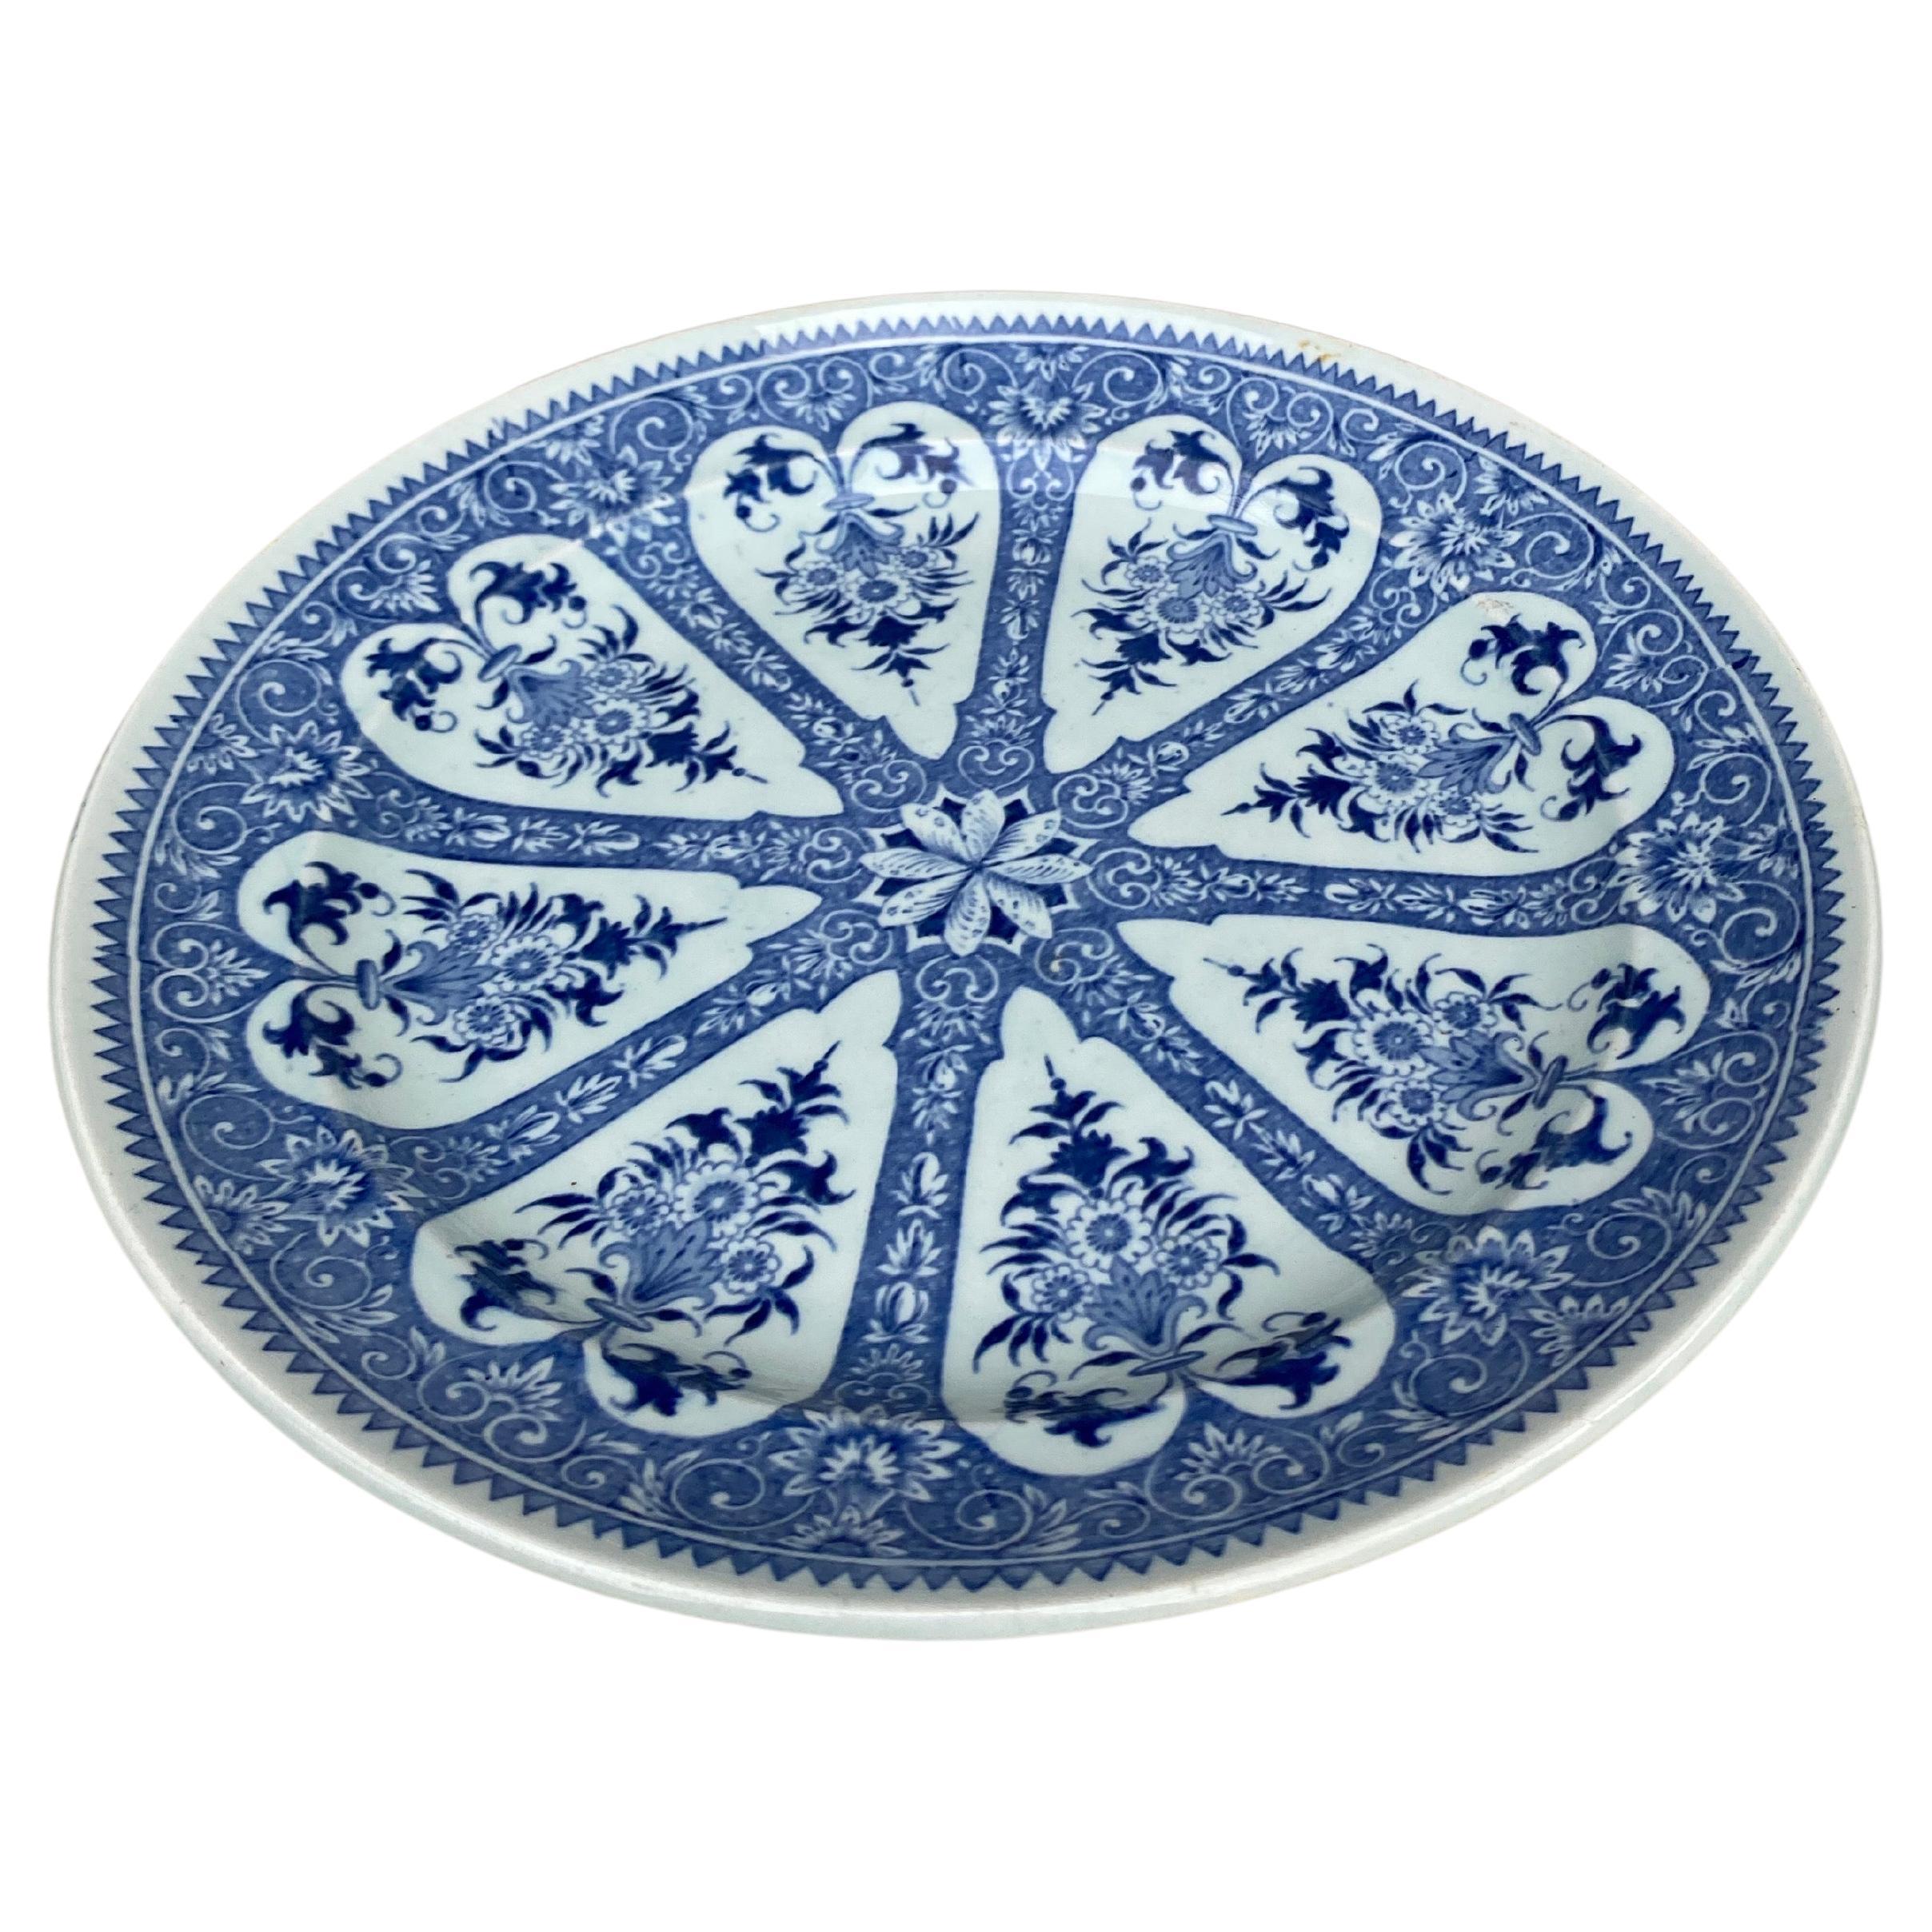 19th Century French blue and white faience dinner plate signed 